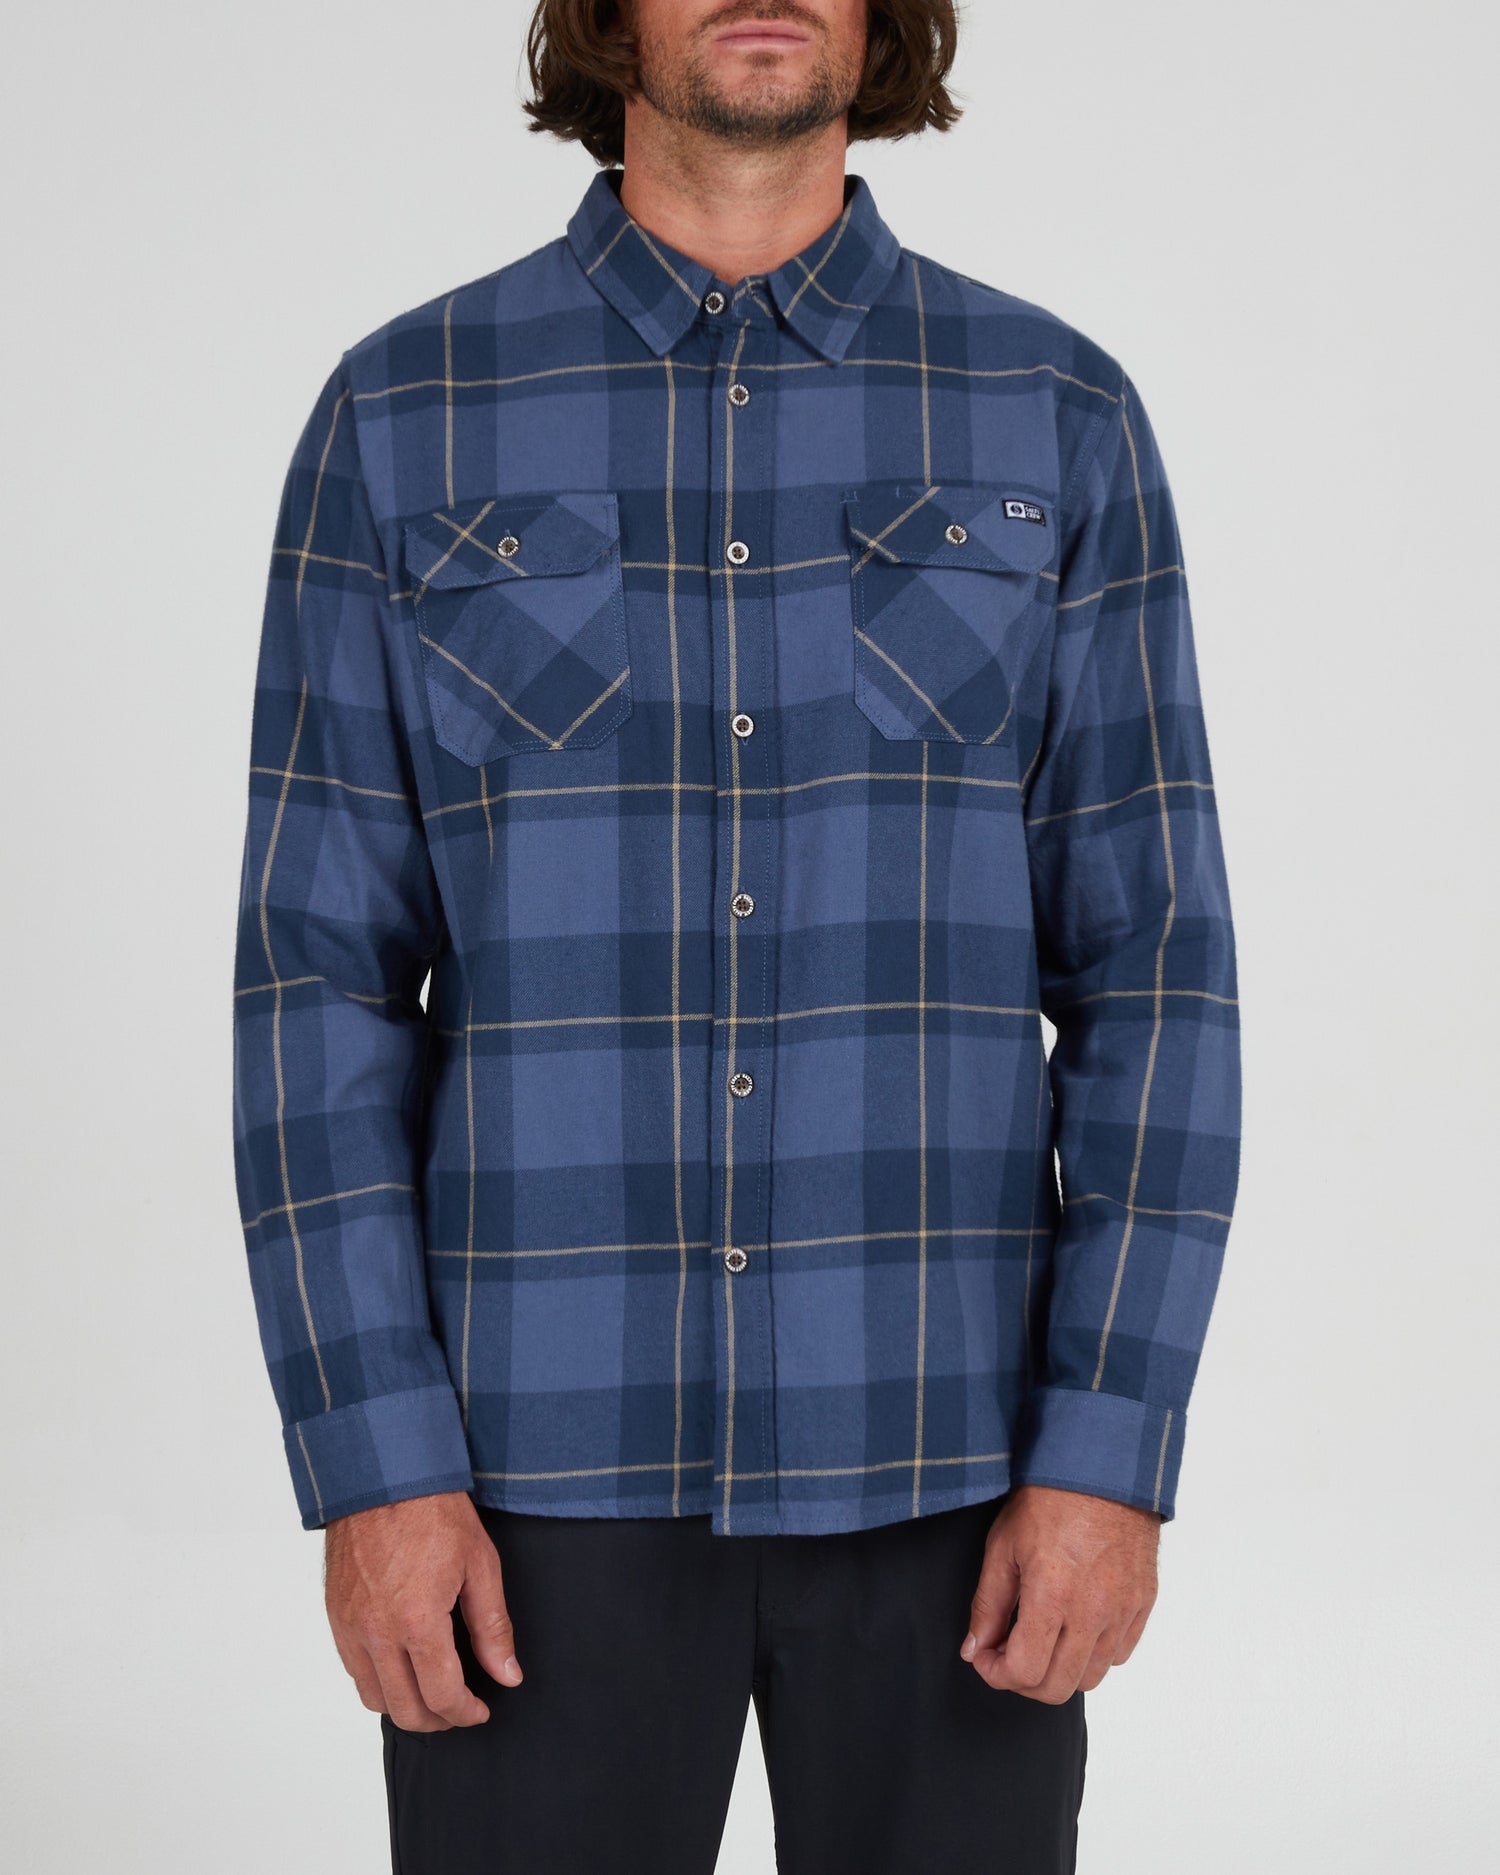 On body front of the First Light Navy Blue Flannel